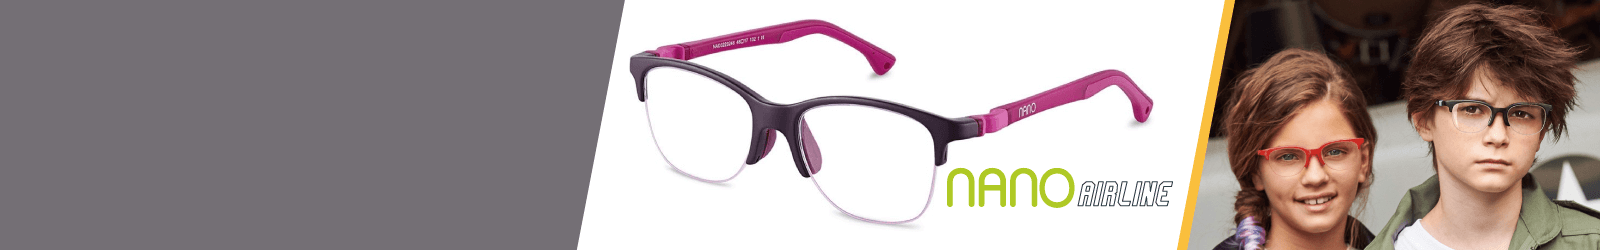 Nano Airline Kids Glasses from 6 to 8-year-old for Girls